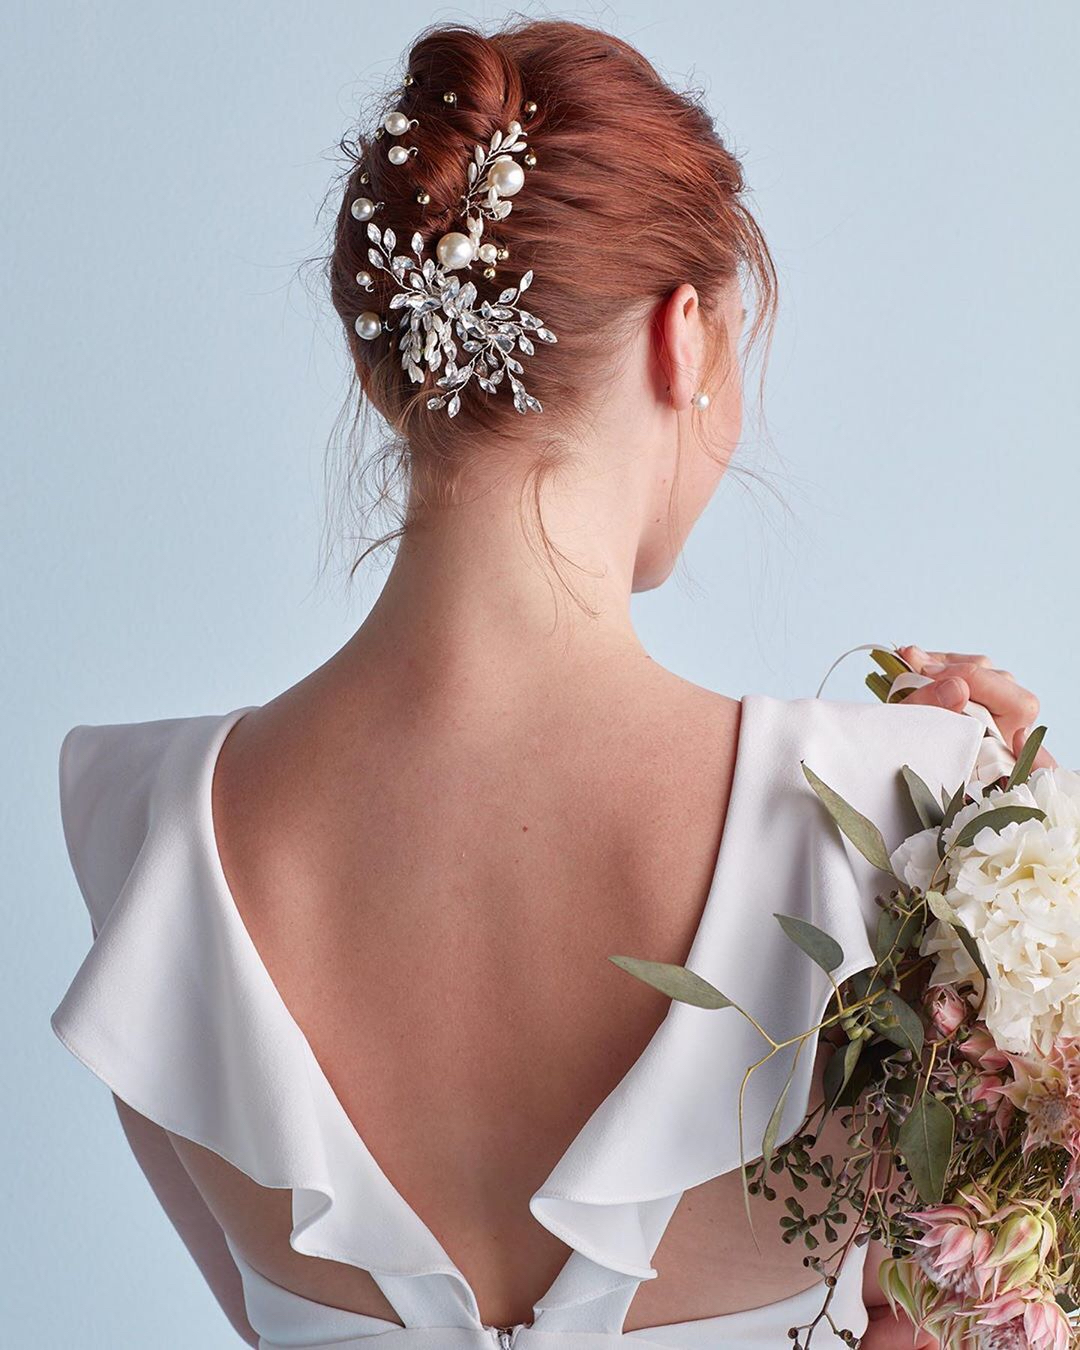 Bridal Accessories Checklist for Your Wedding